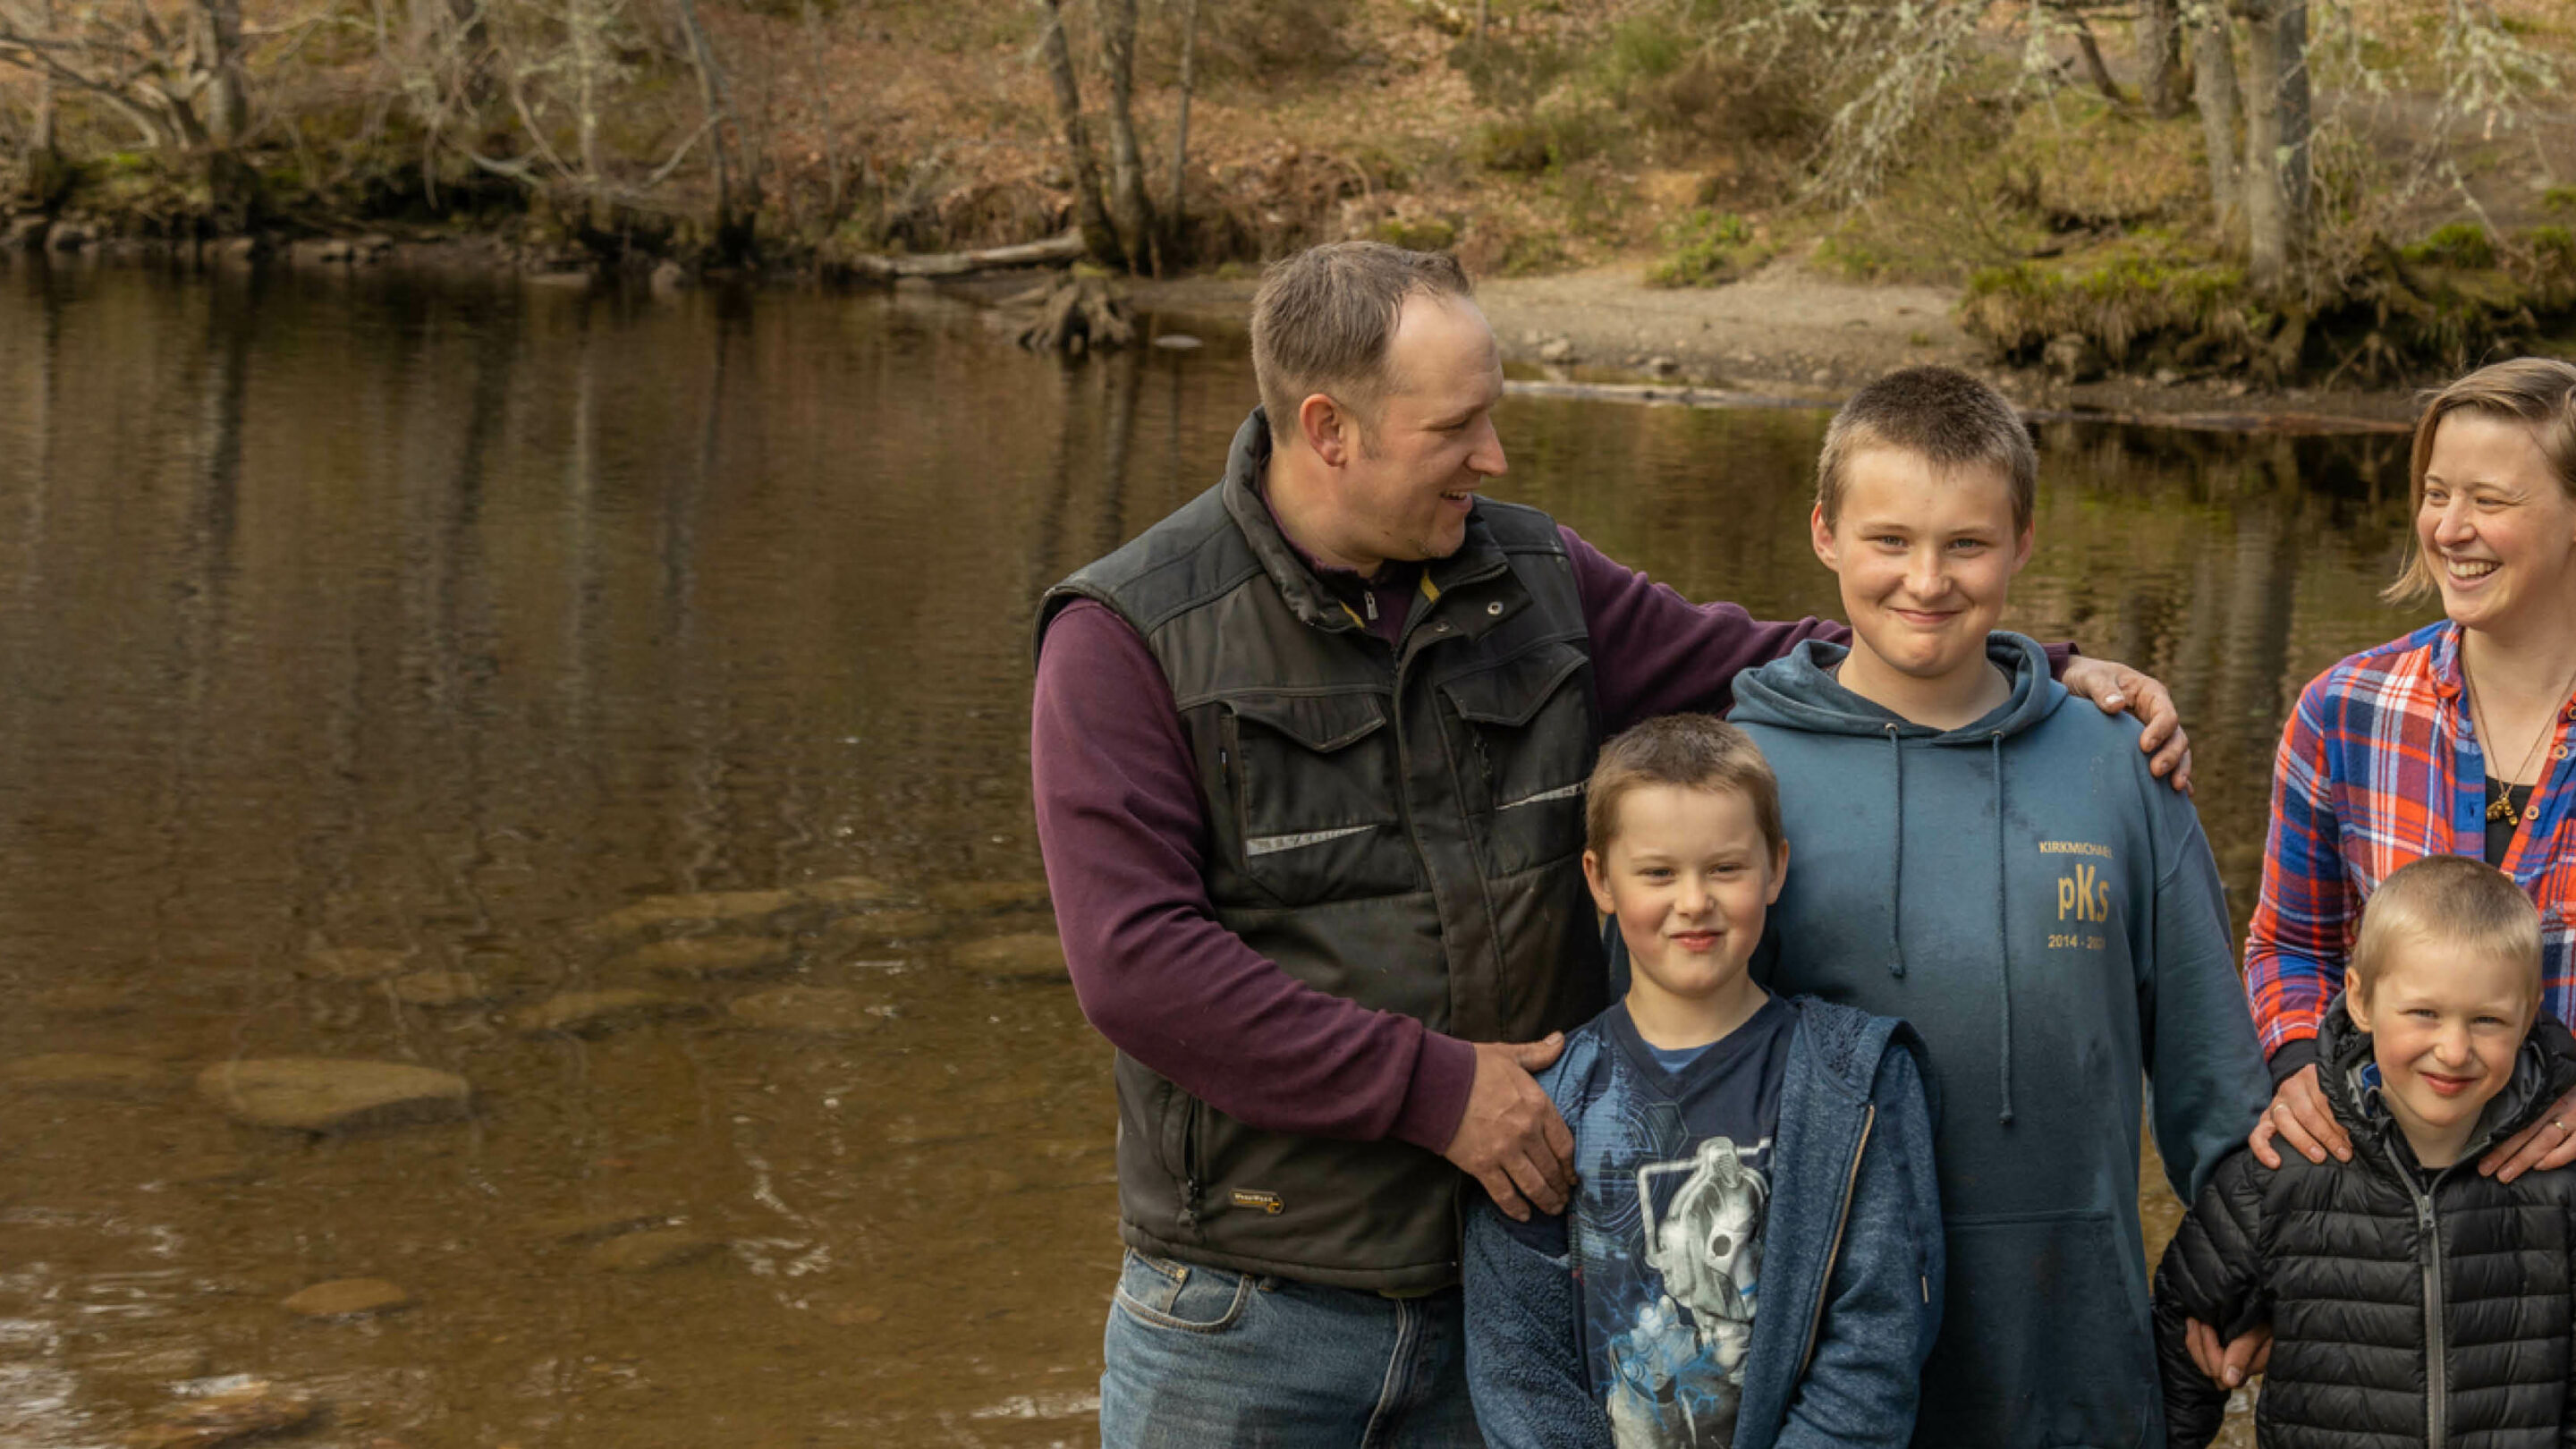 A family of five (mum, dad and three sons) smiling at each other against a background of a river in woodland